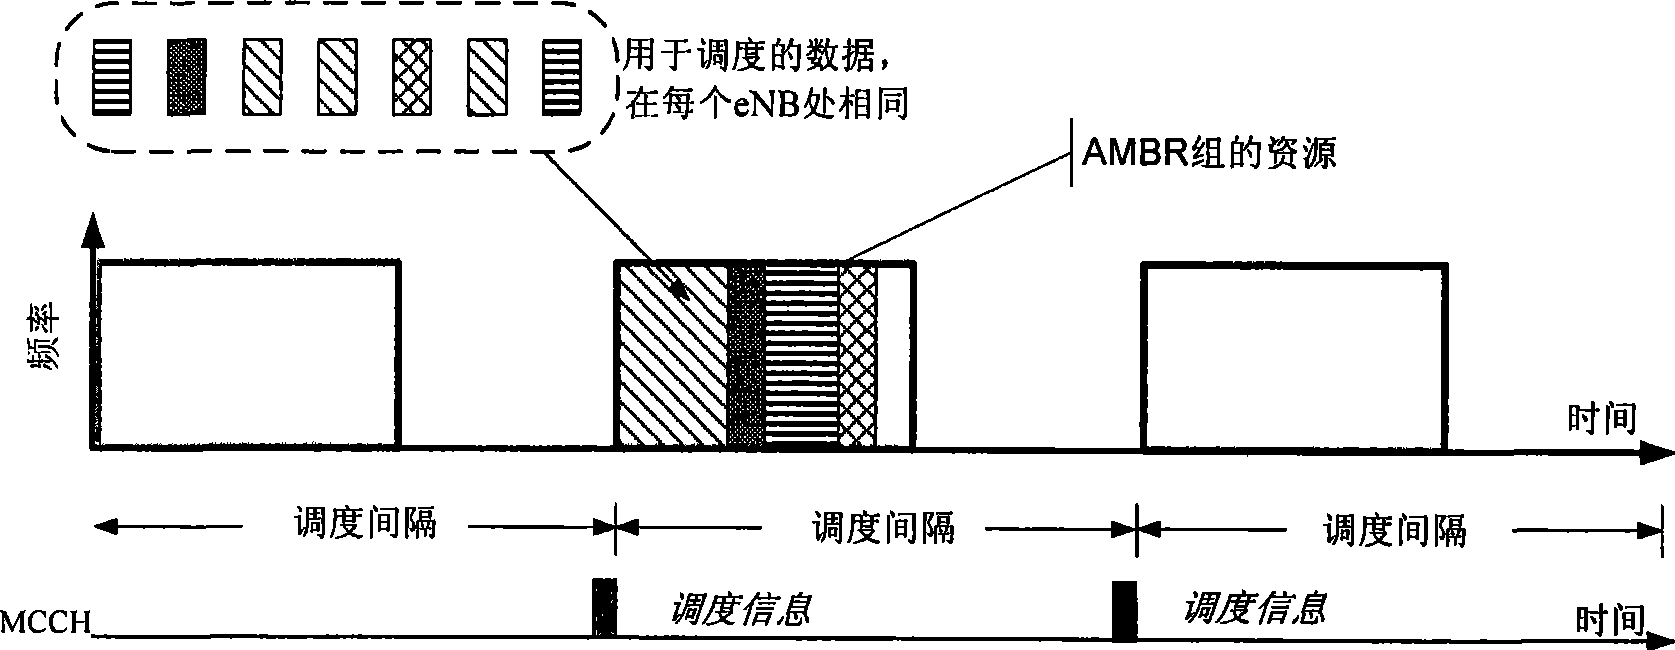 E-MBMS system and method for statistic multiplexing by using AMBR